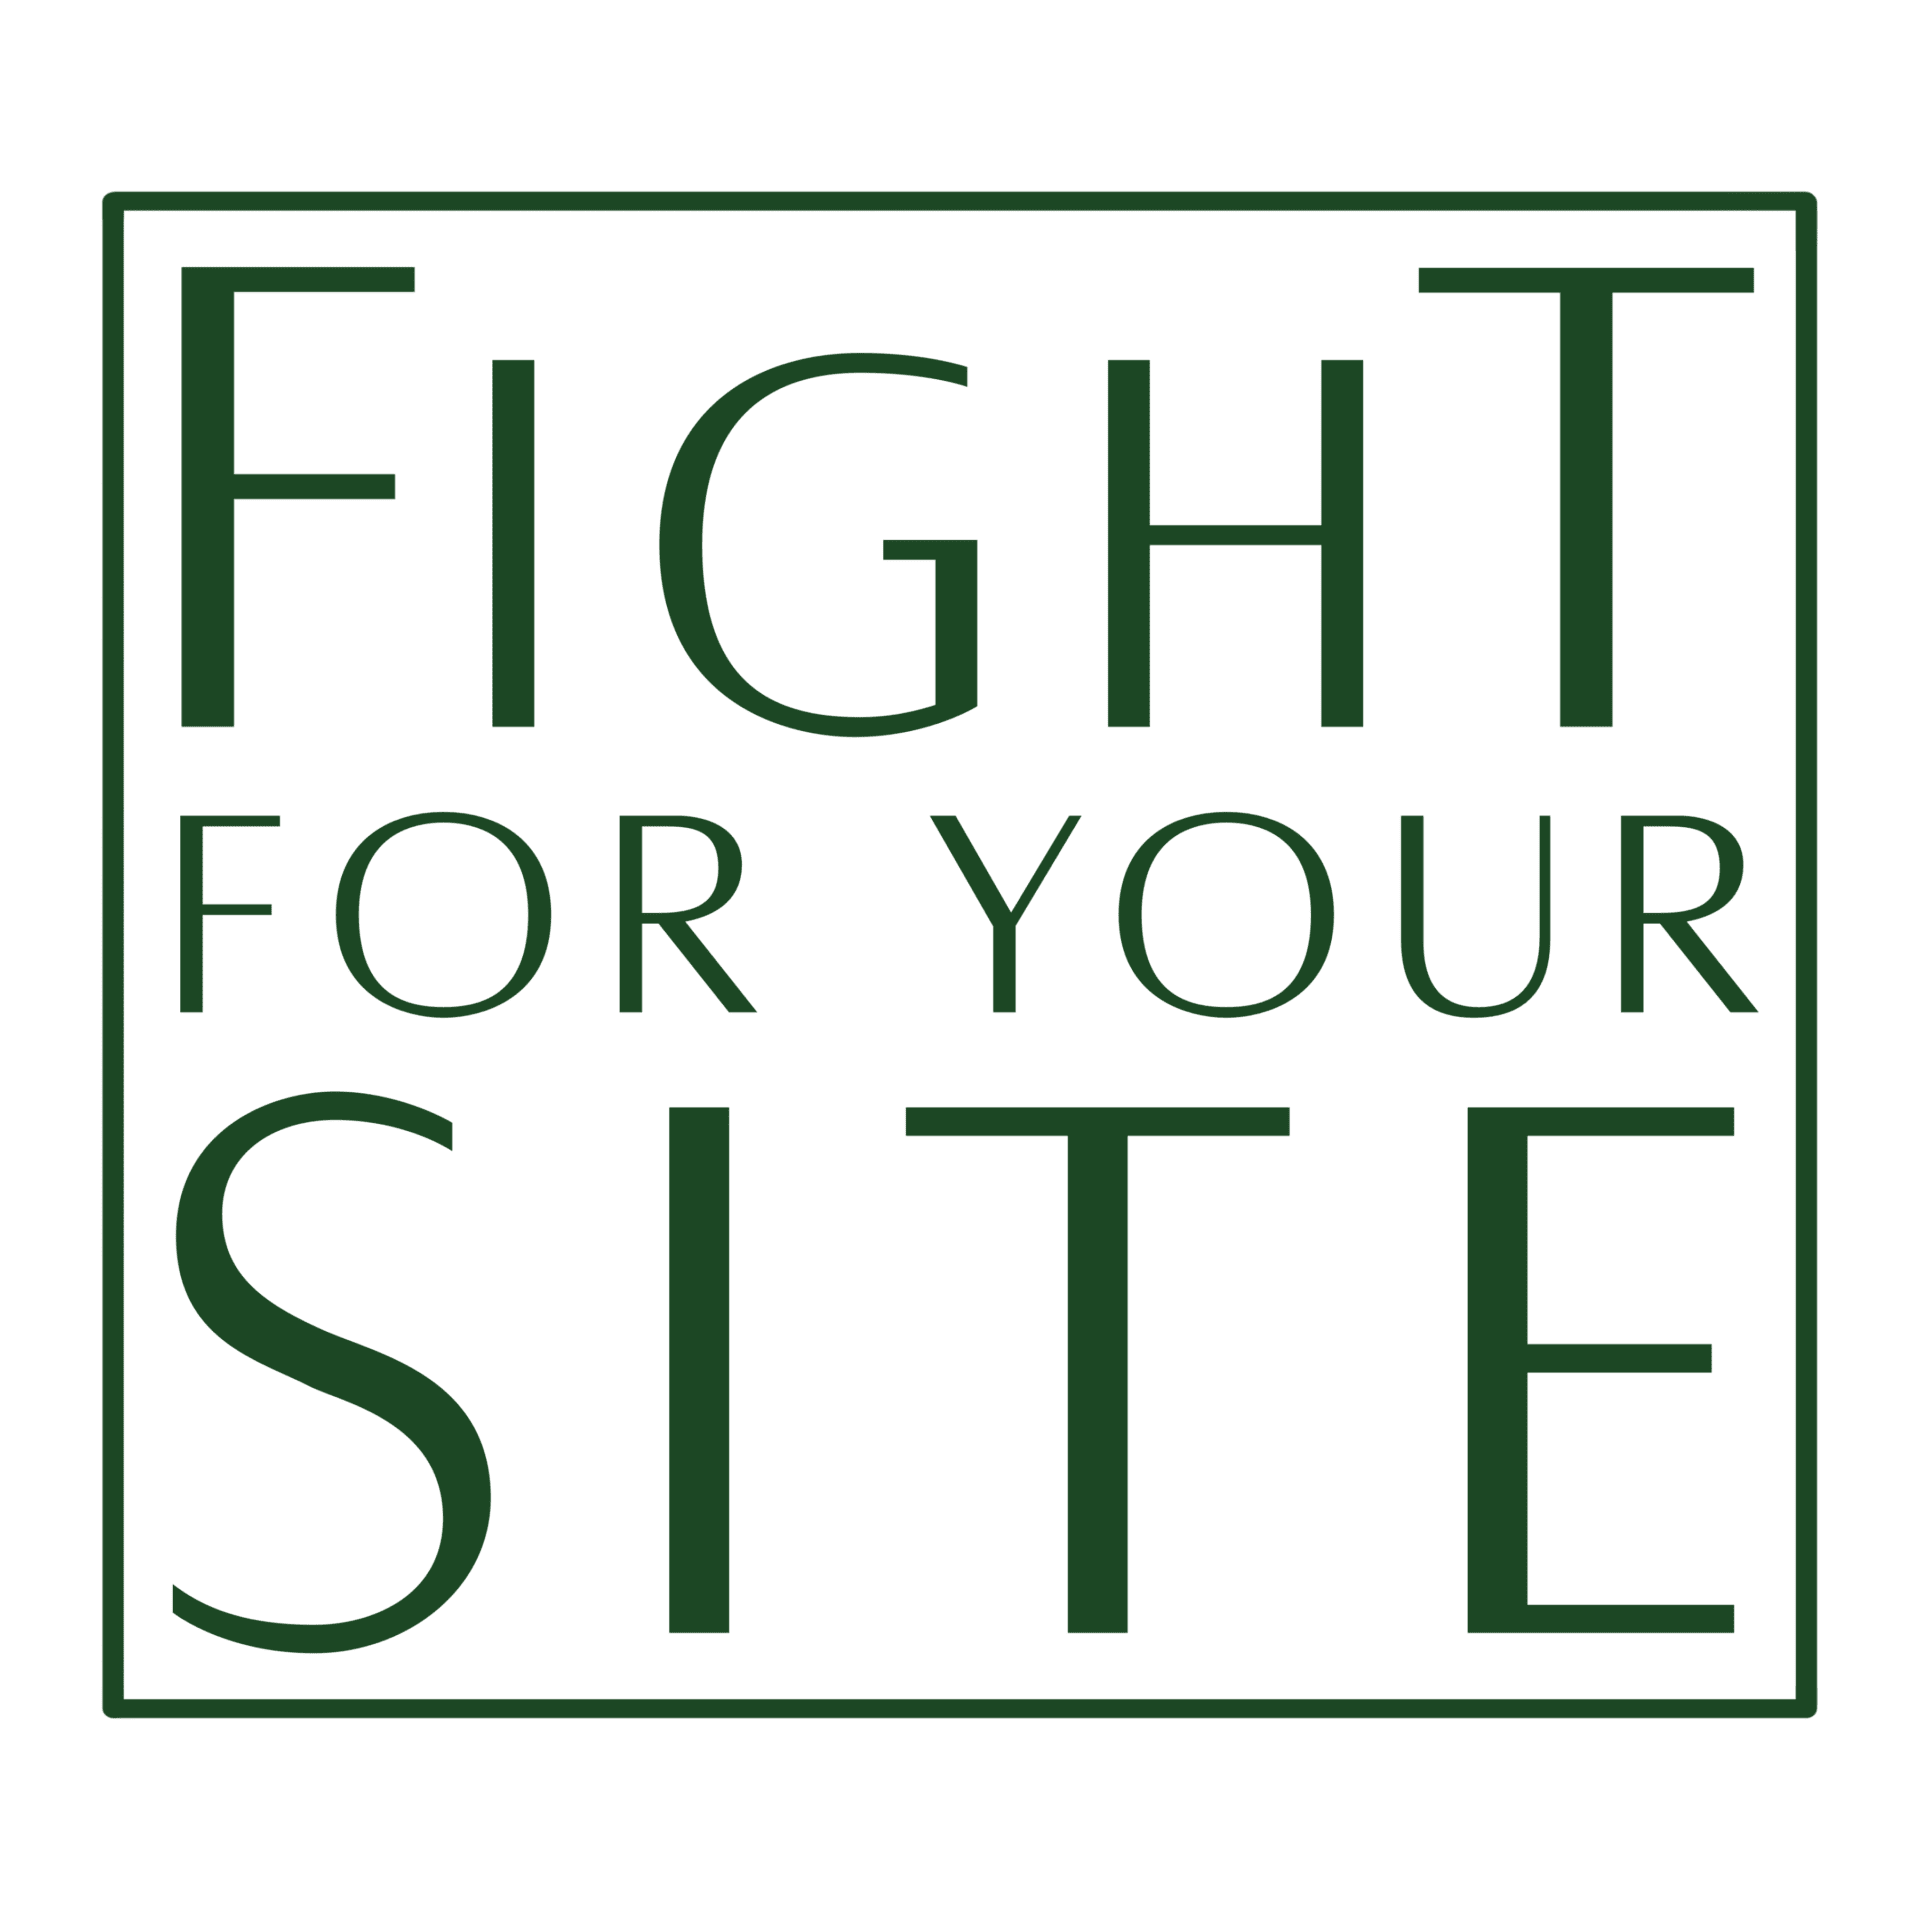 Fight For Your Site